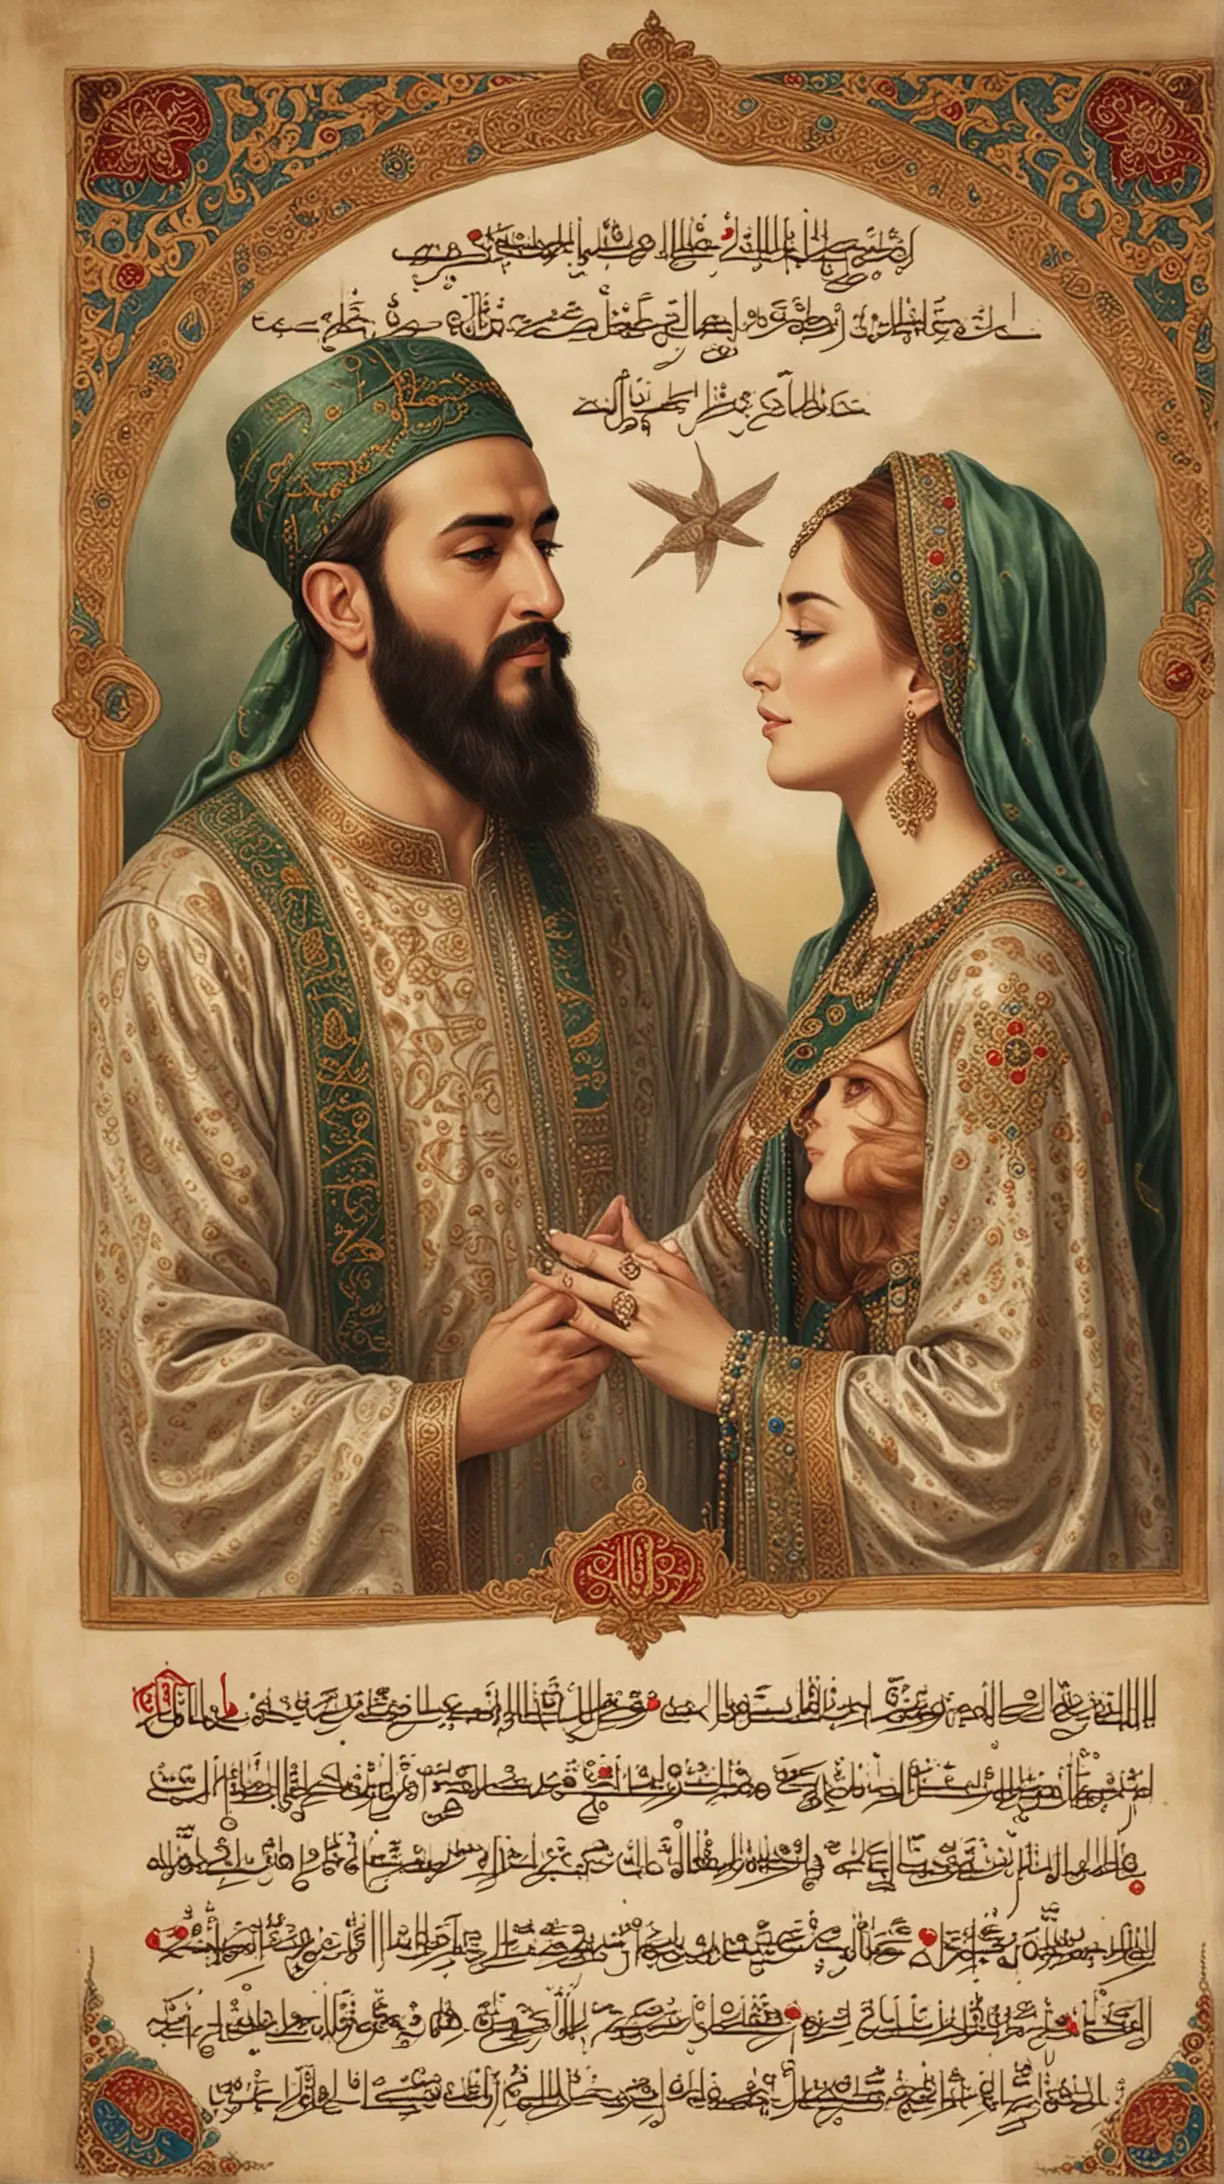 Suleiman Reciting Poetry to Hurrem Capturing Loves Intimacy with Floating Verses